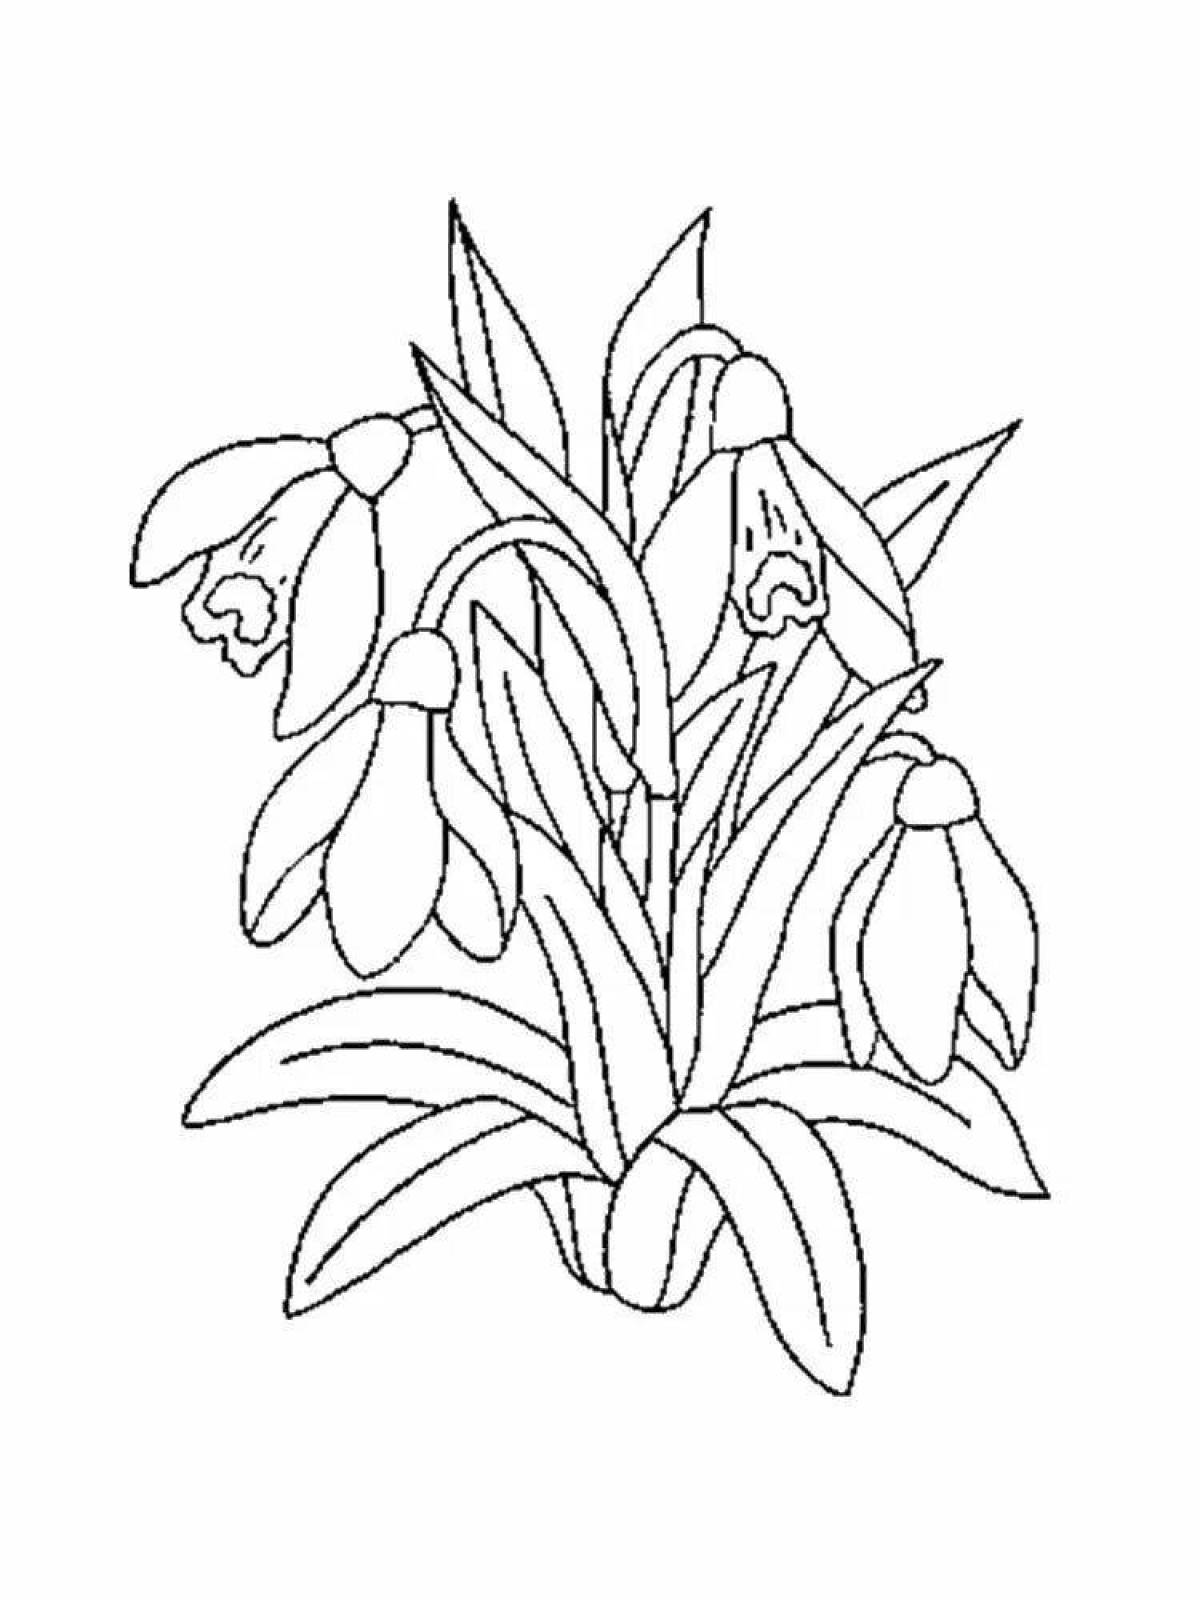 Blessed snowdrops coloring pages for kids